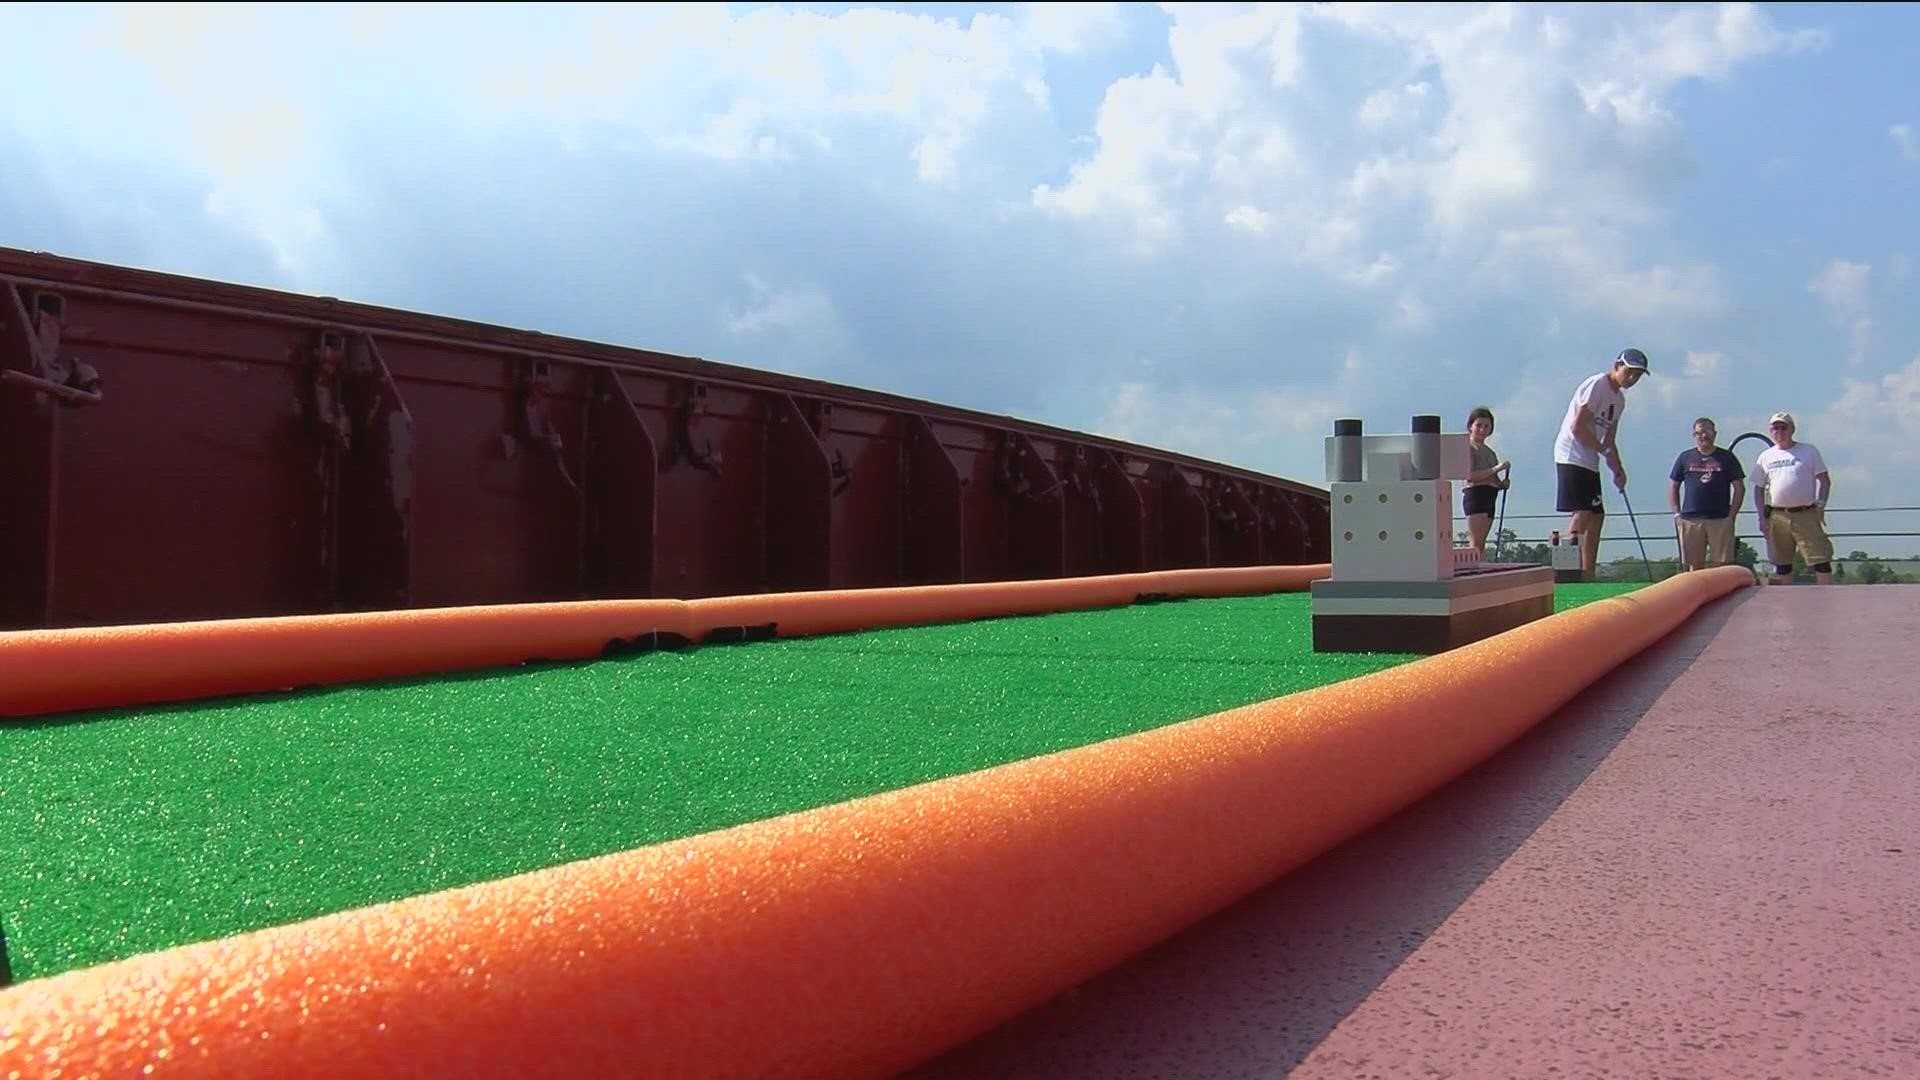 The National Museum of the Great Lakes is bringing miniature golf to the deck of the Schoonmaker, with two maritime-themed greens overlooking the Maumee River.